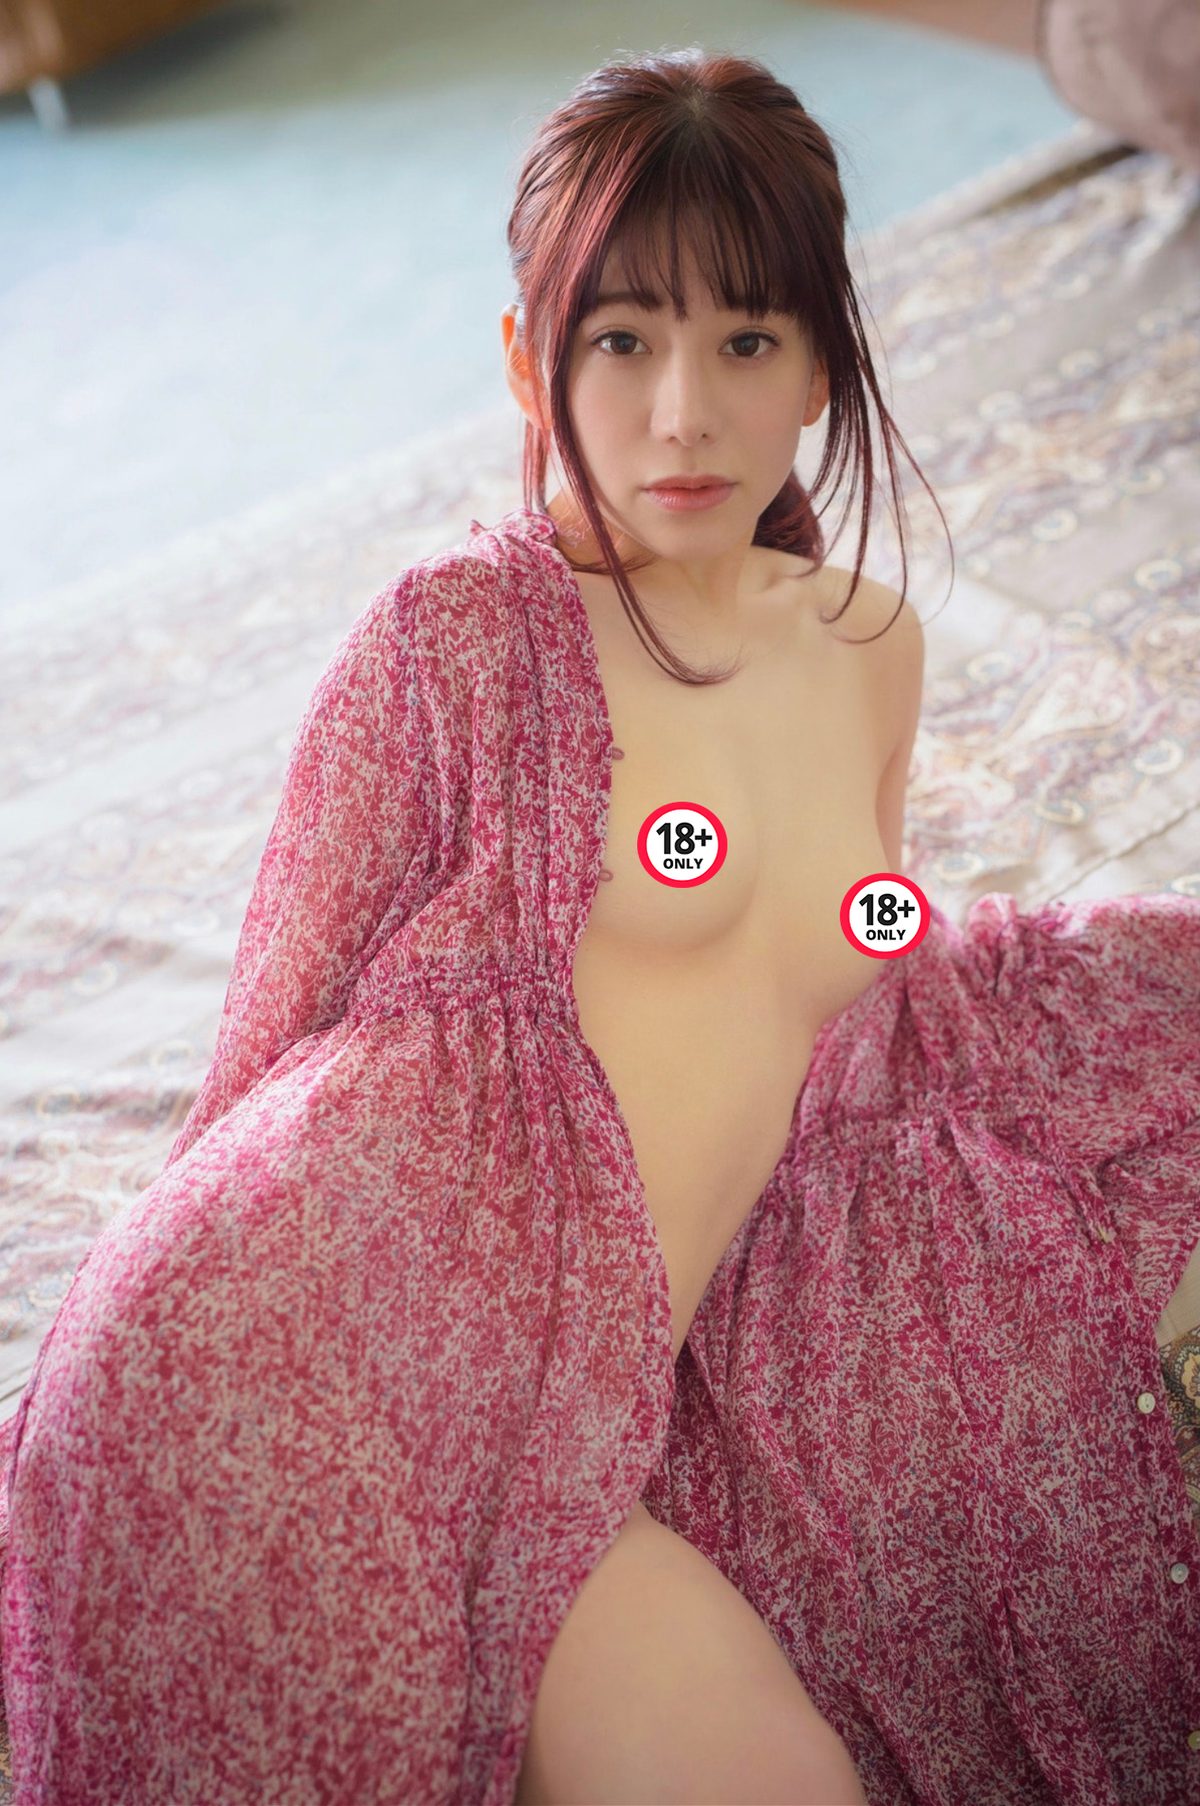 Nozomi Arimura 有村のぞみ Hair Nude Photo Collection As It Is 0015 5148126775.jpg